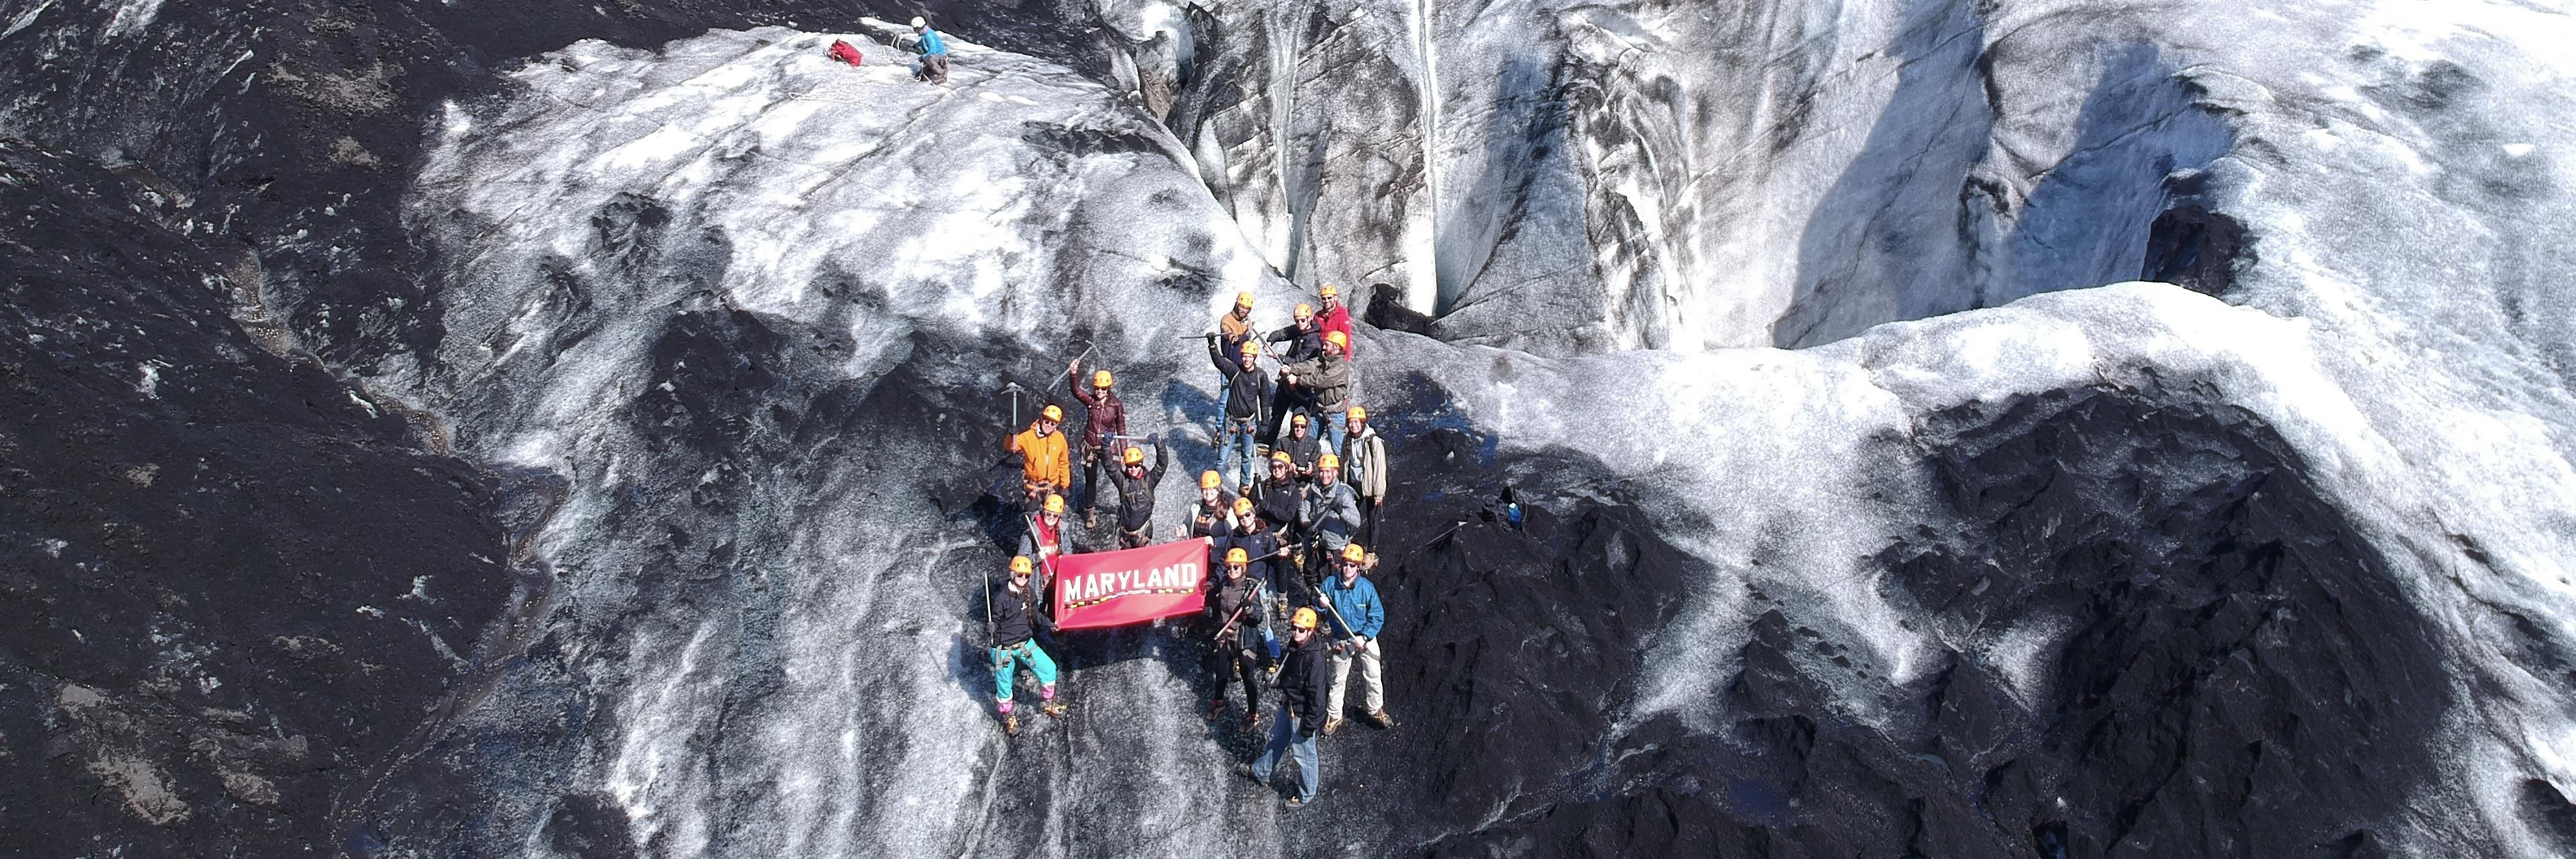 UMD students studying sustainability in Iceland take a photo with a University of Maryland flag at a glacier. 